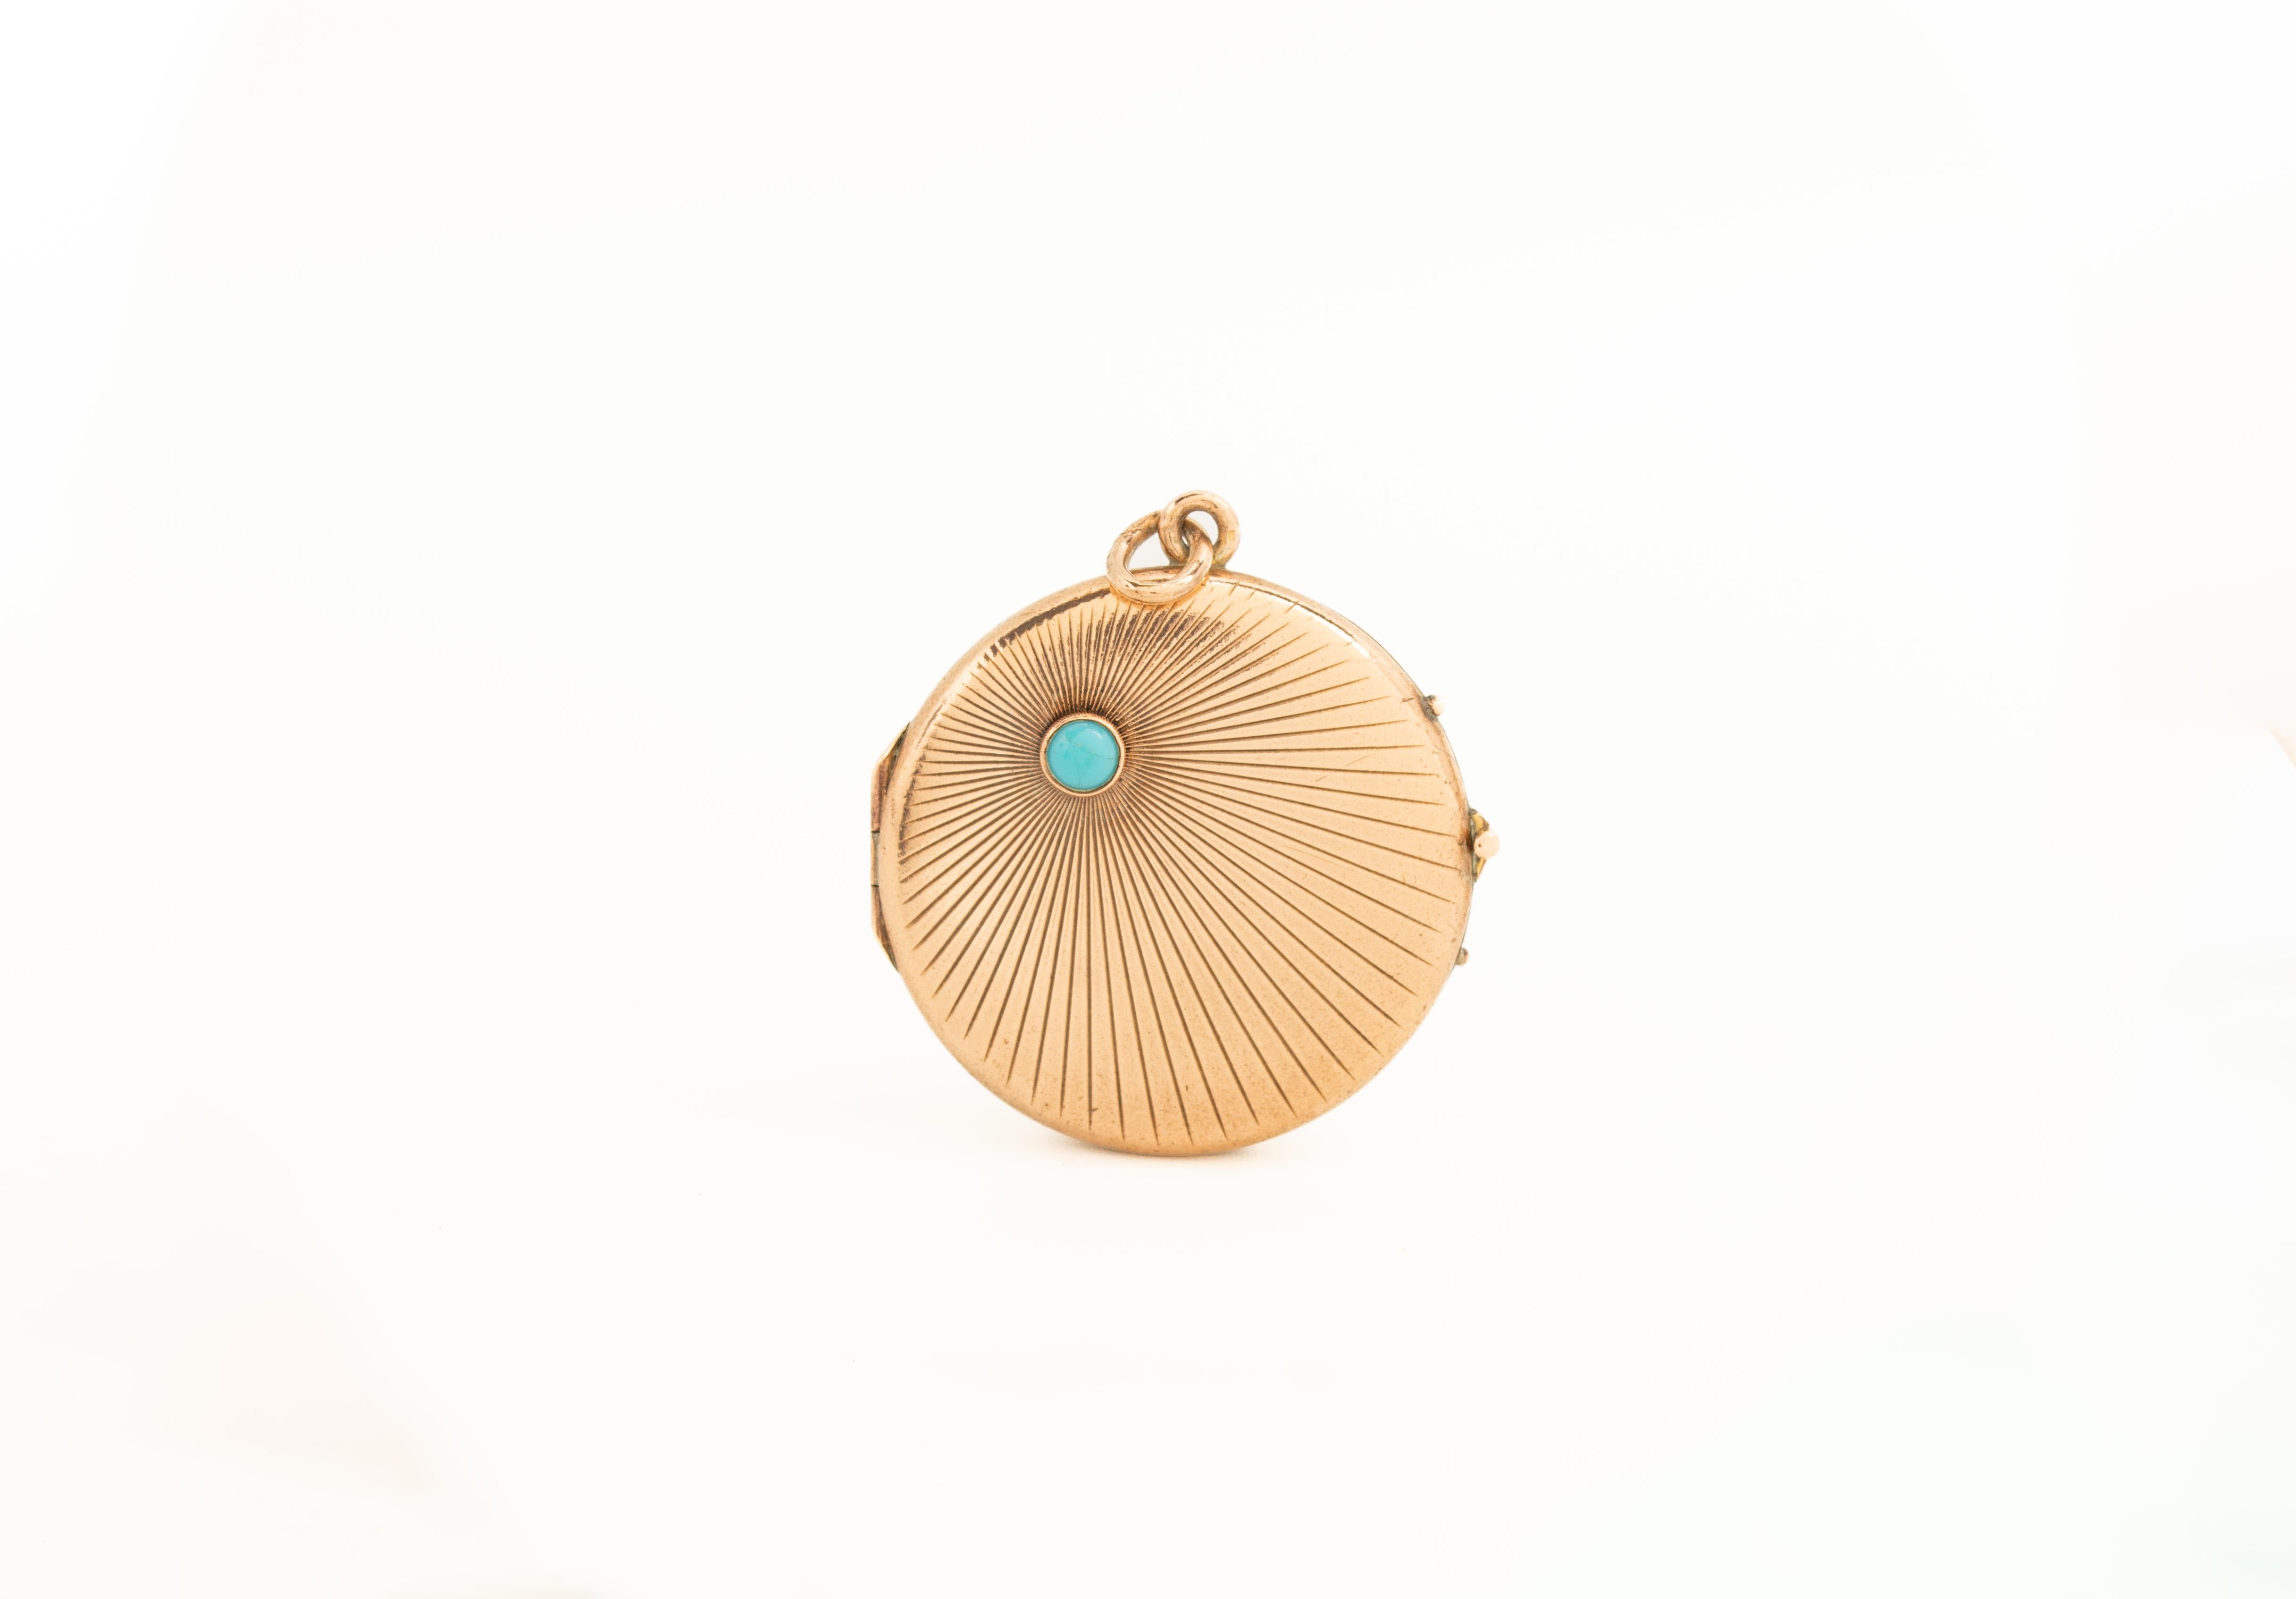 A lovely antique yellow metal circular Art Deco locket with a sunburst design and a natural turquoise gemstone. This locket has typical for the Art Deco era geometric motif with a beautiful turquoise on the top left. The locket opens to reveal two